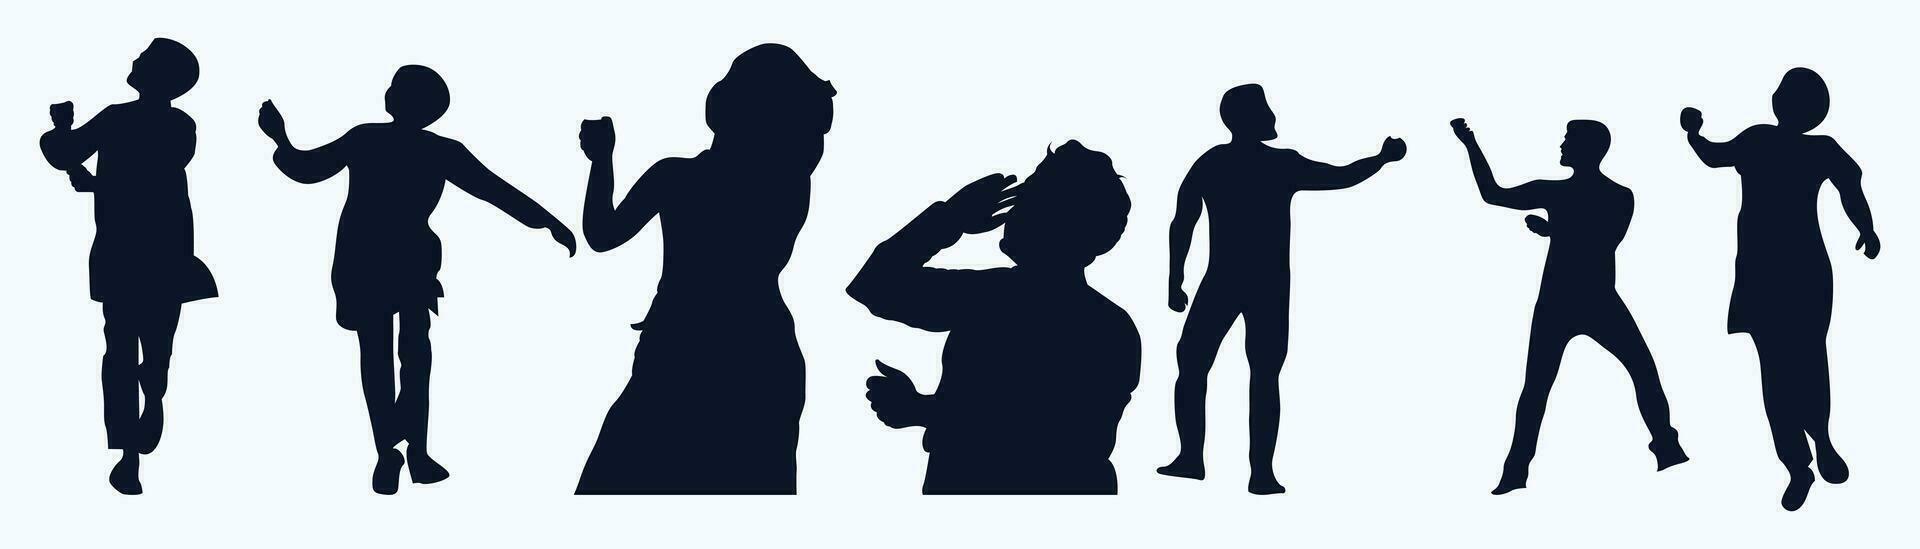 silhouette man waving the Indian flag vector